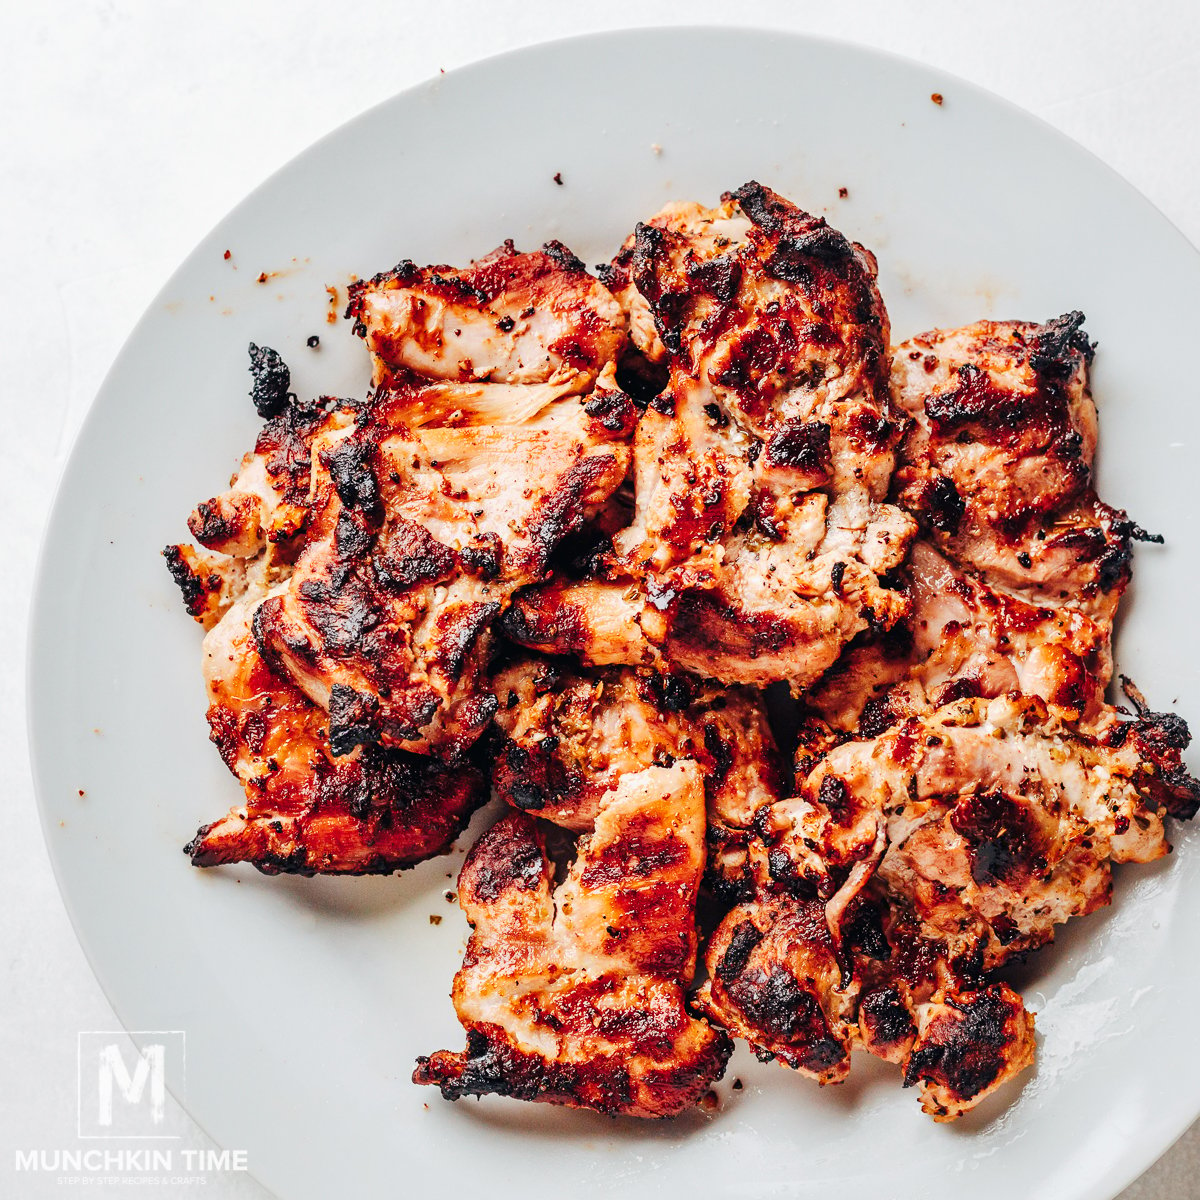 Grill the marinated chicken on high heat